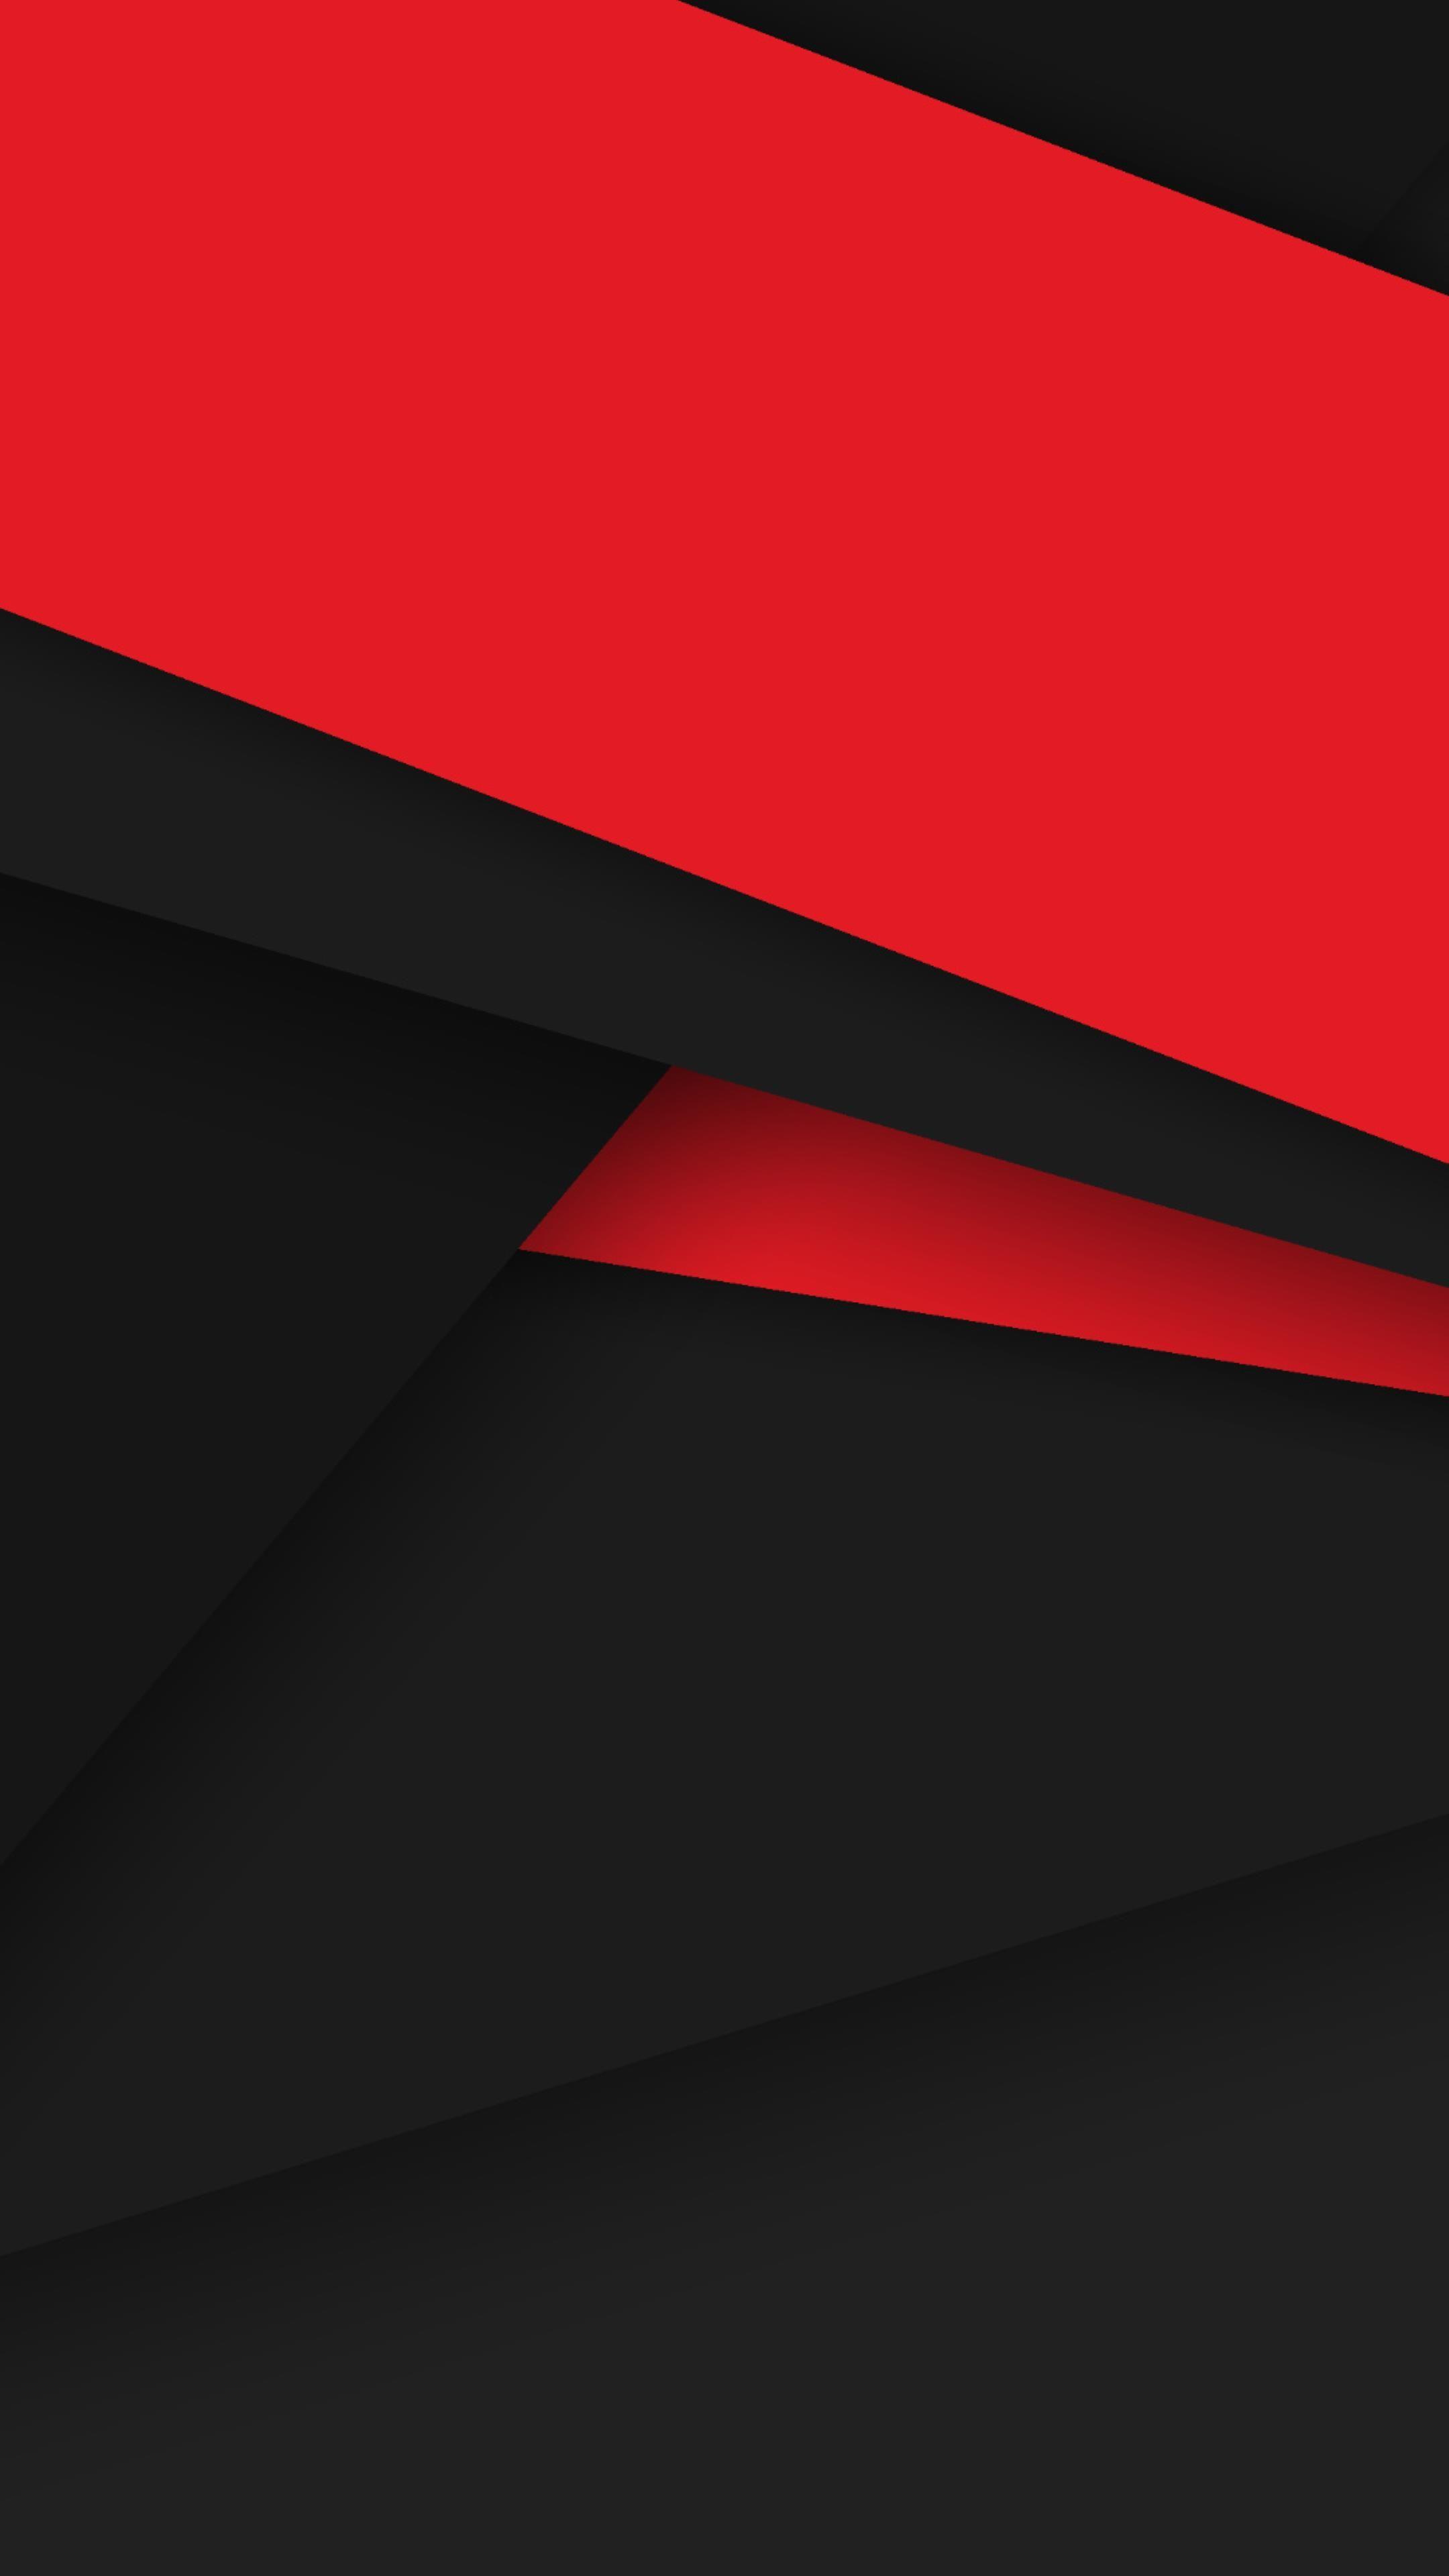 AMOLED Material Design Wallpaper. Red and black